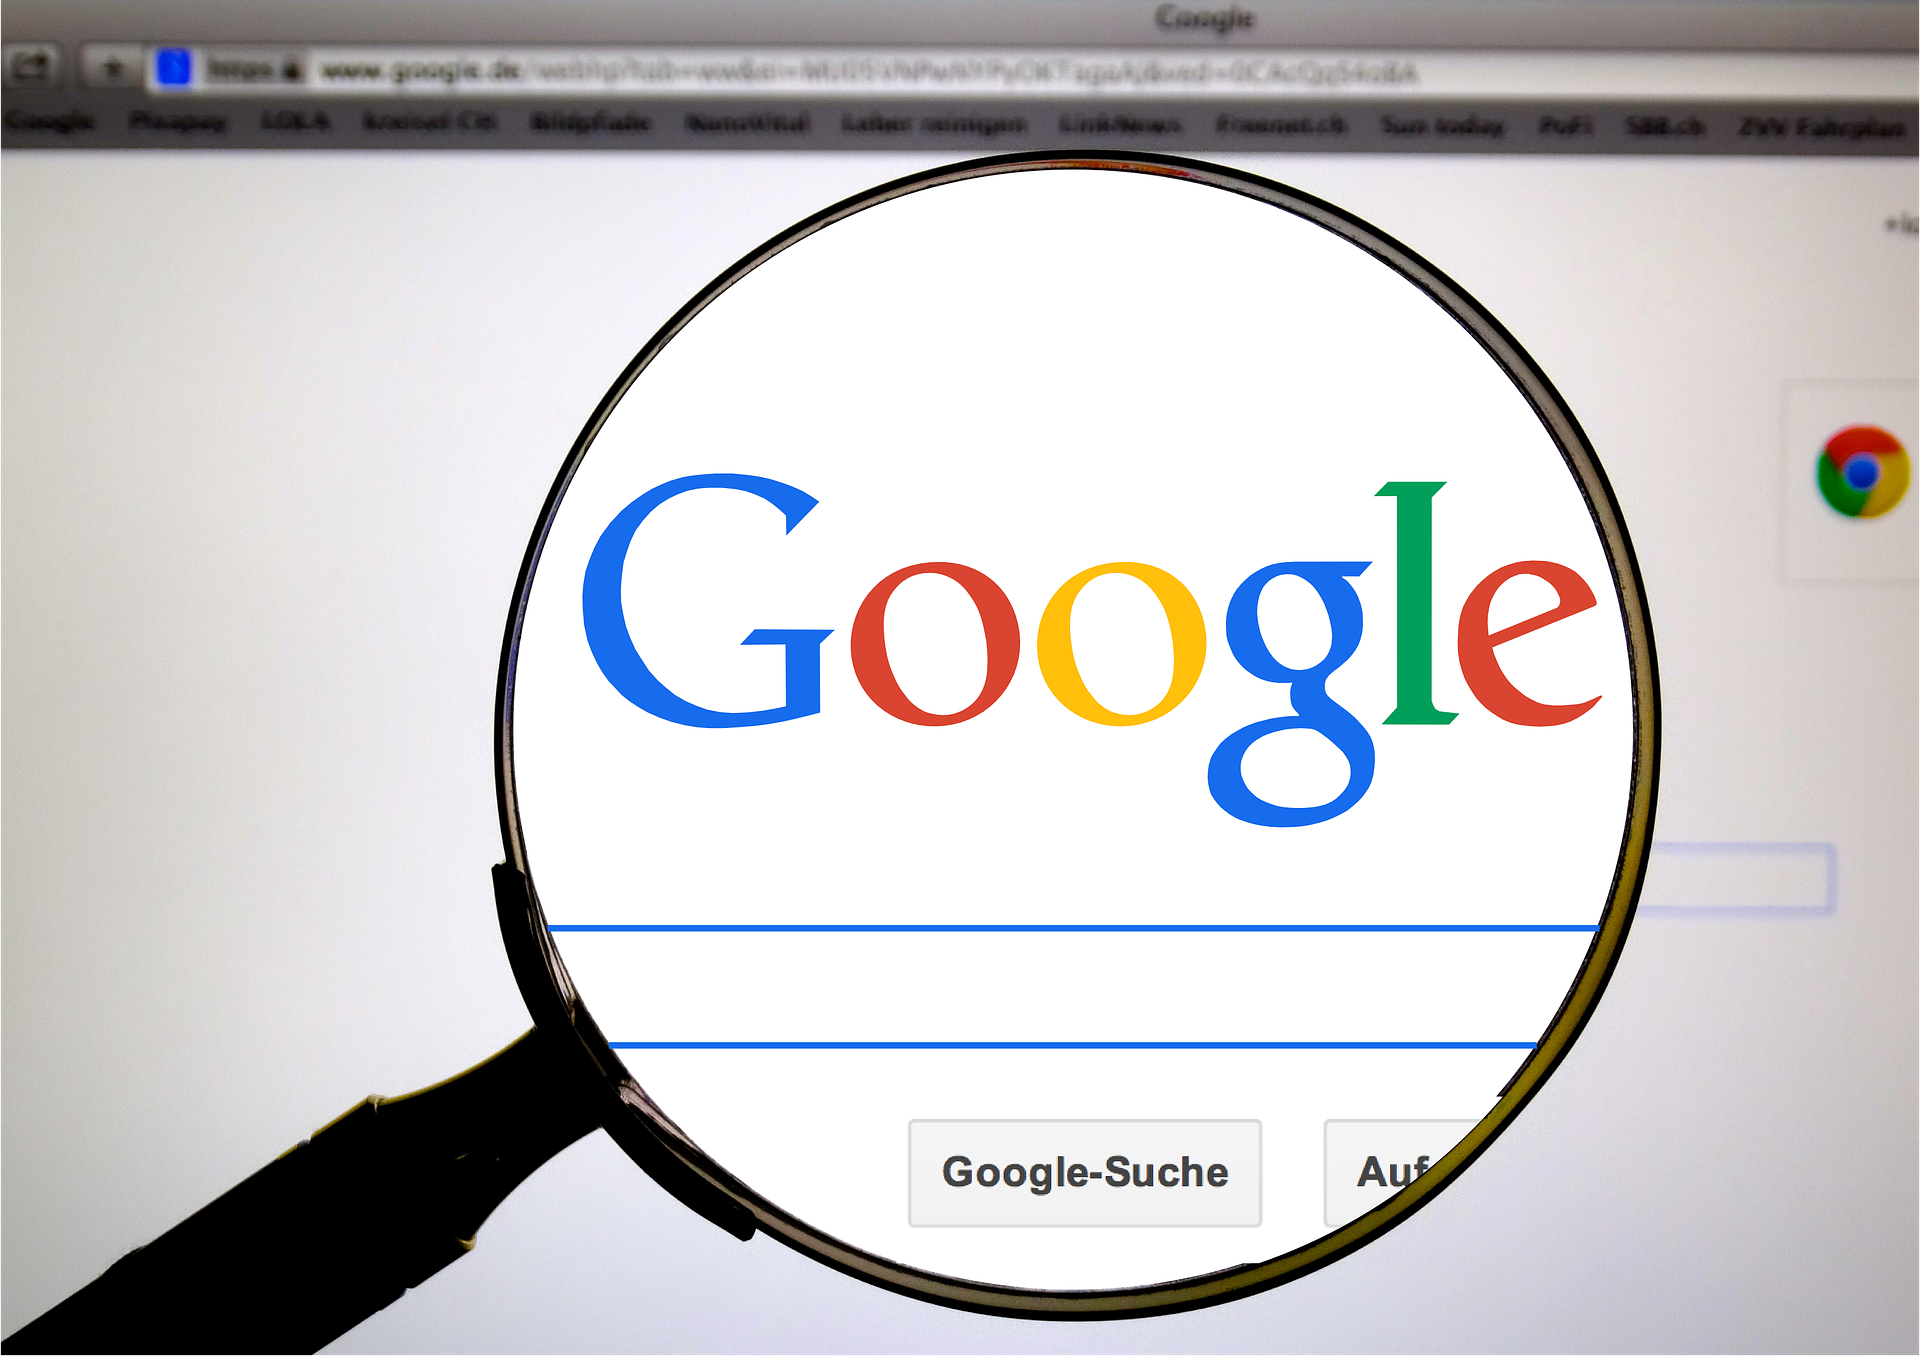 Google Updates Policy Circumvention Guidelines to Combat Spam and Misleading Content